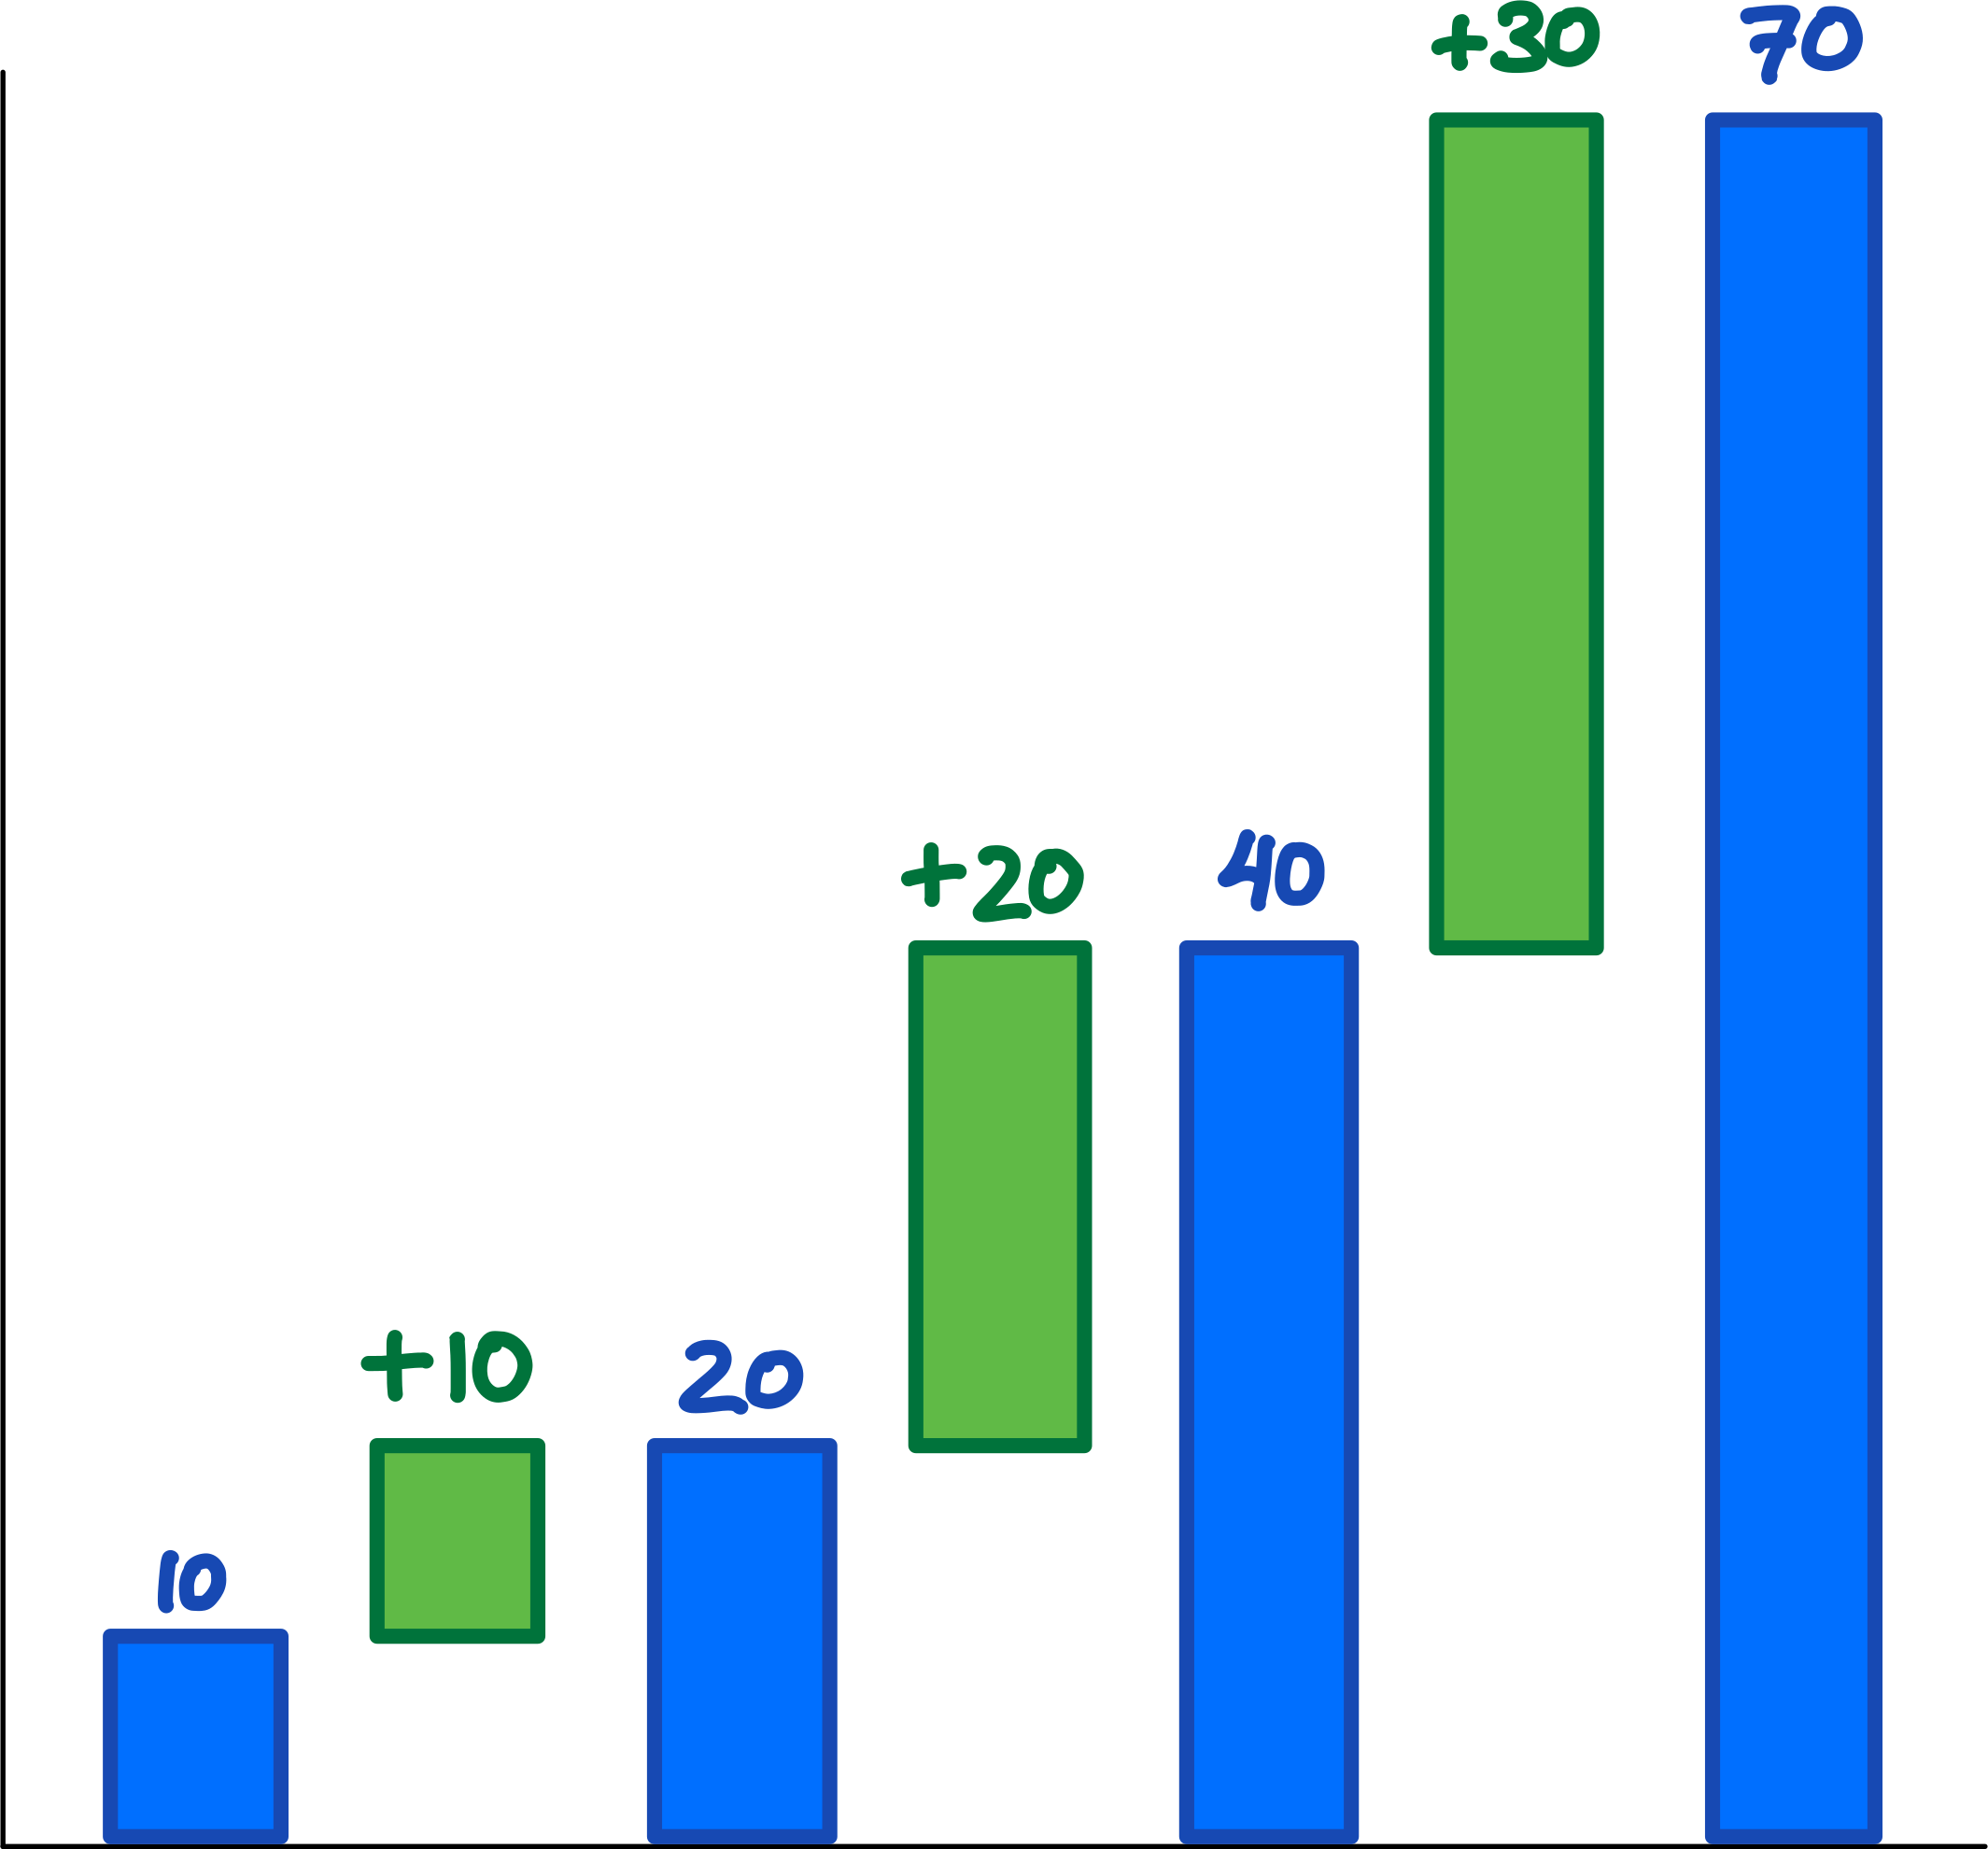 Successive values (in blue) are increasing more and more (in green). The green differences are increasing linearly: 10, 20, 30.